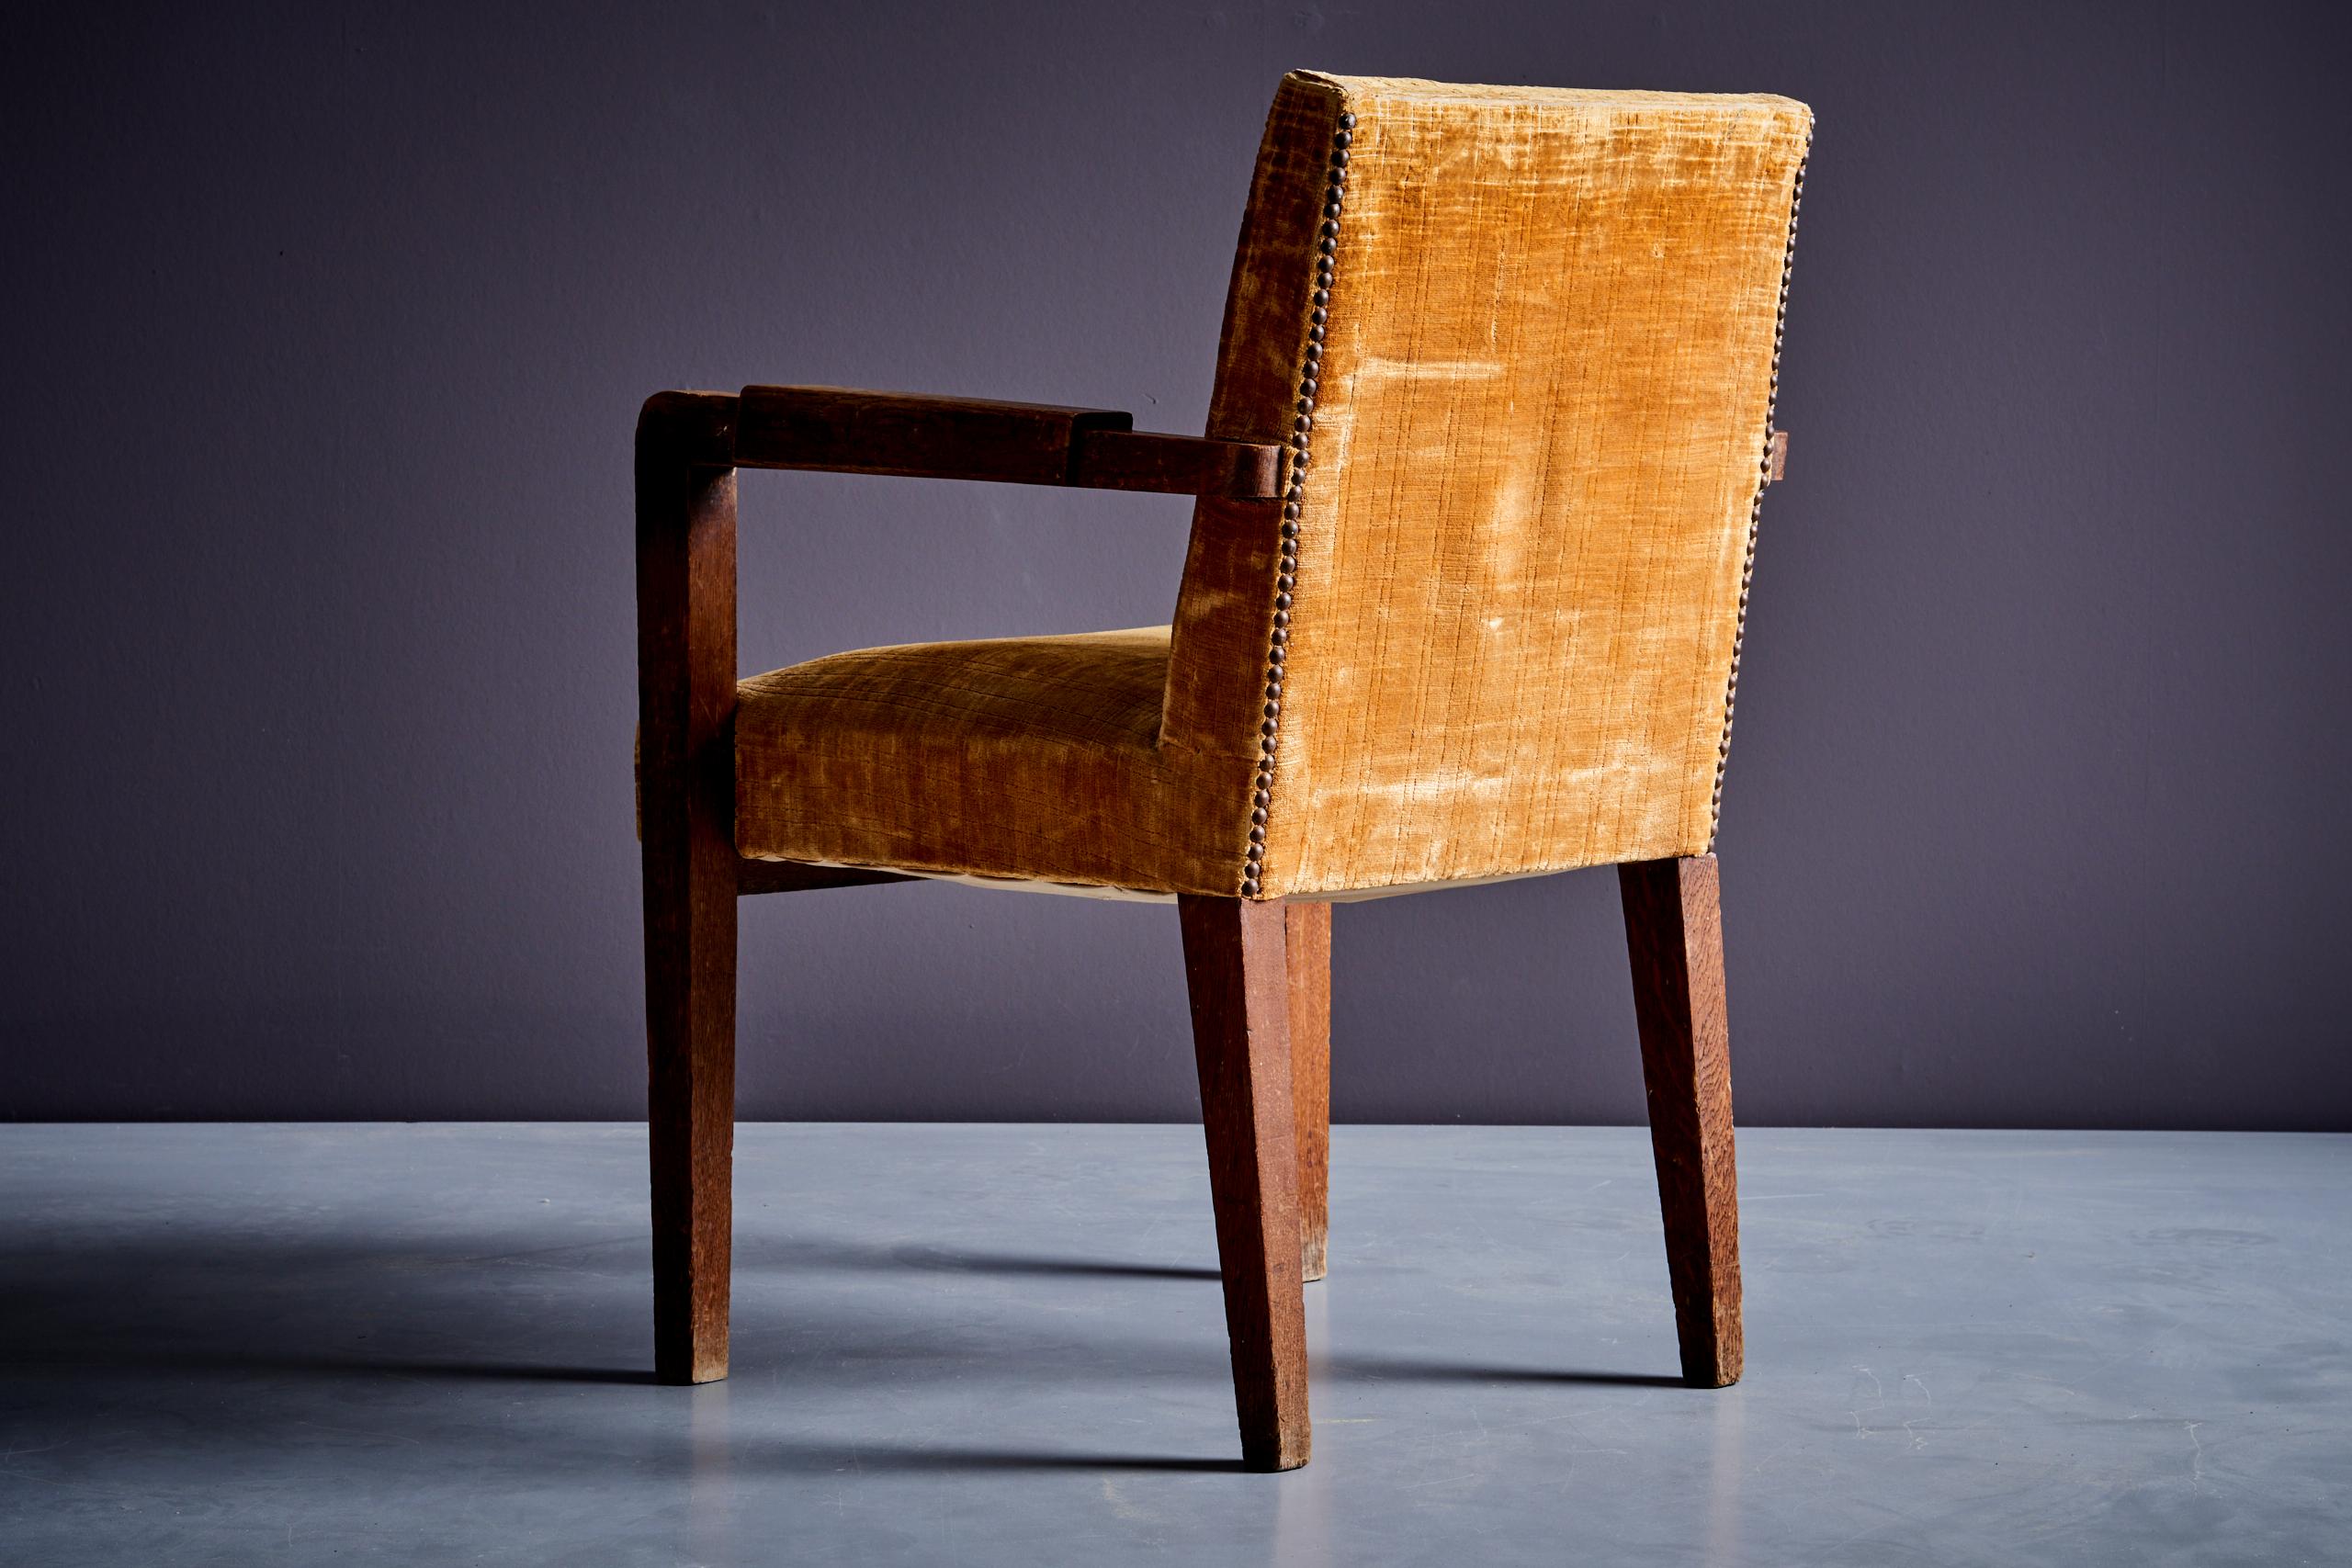 Art Deco Armchair in Oak and mustard colored Upholstery, France - 1940s For Sale 2